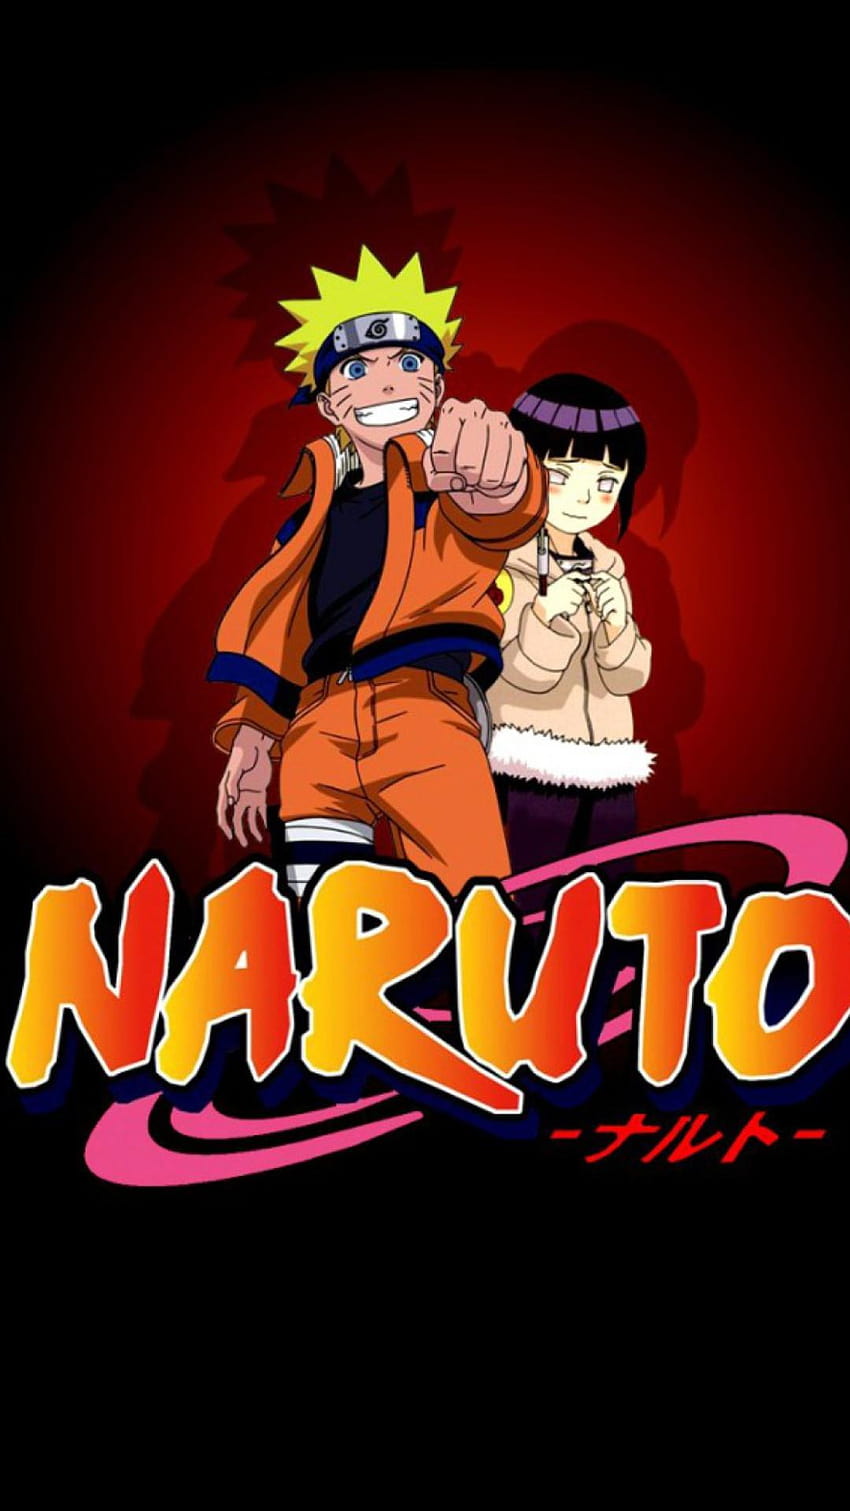 Naruto Iphone Backgrounds, naruto valentines day HD phone wallpaper